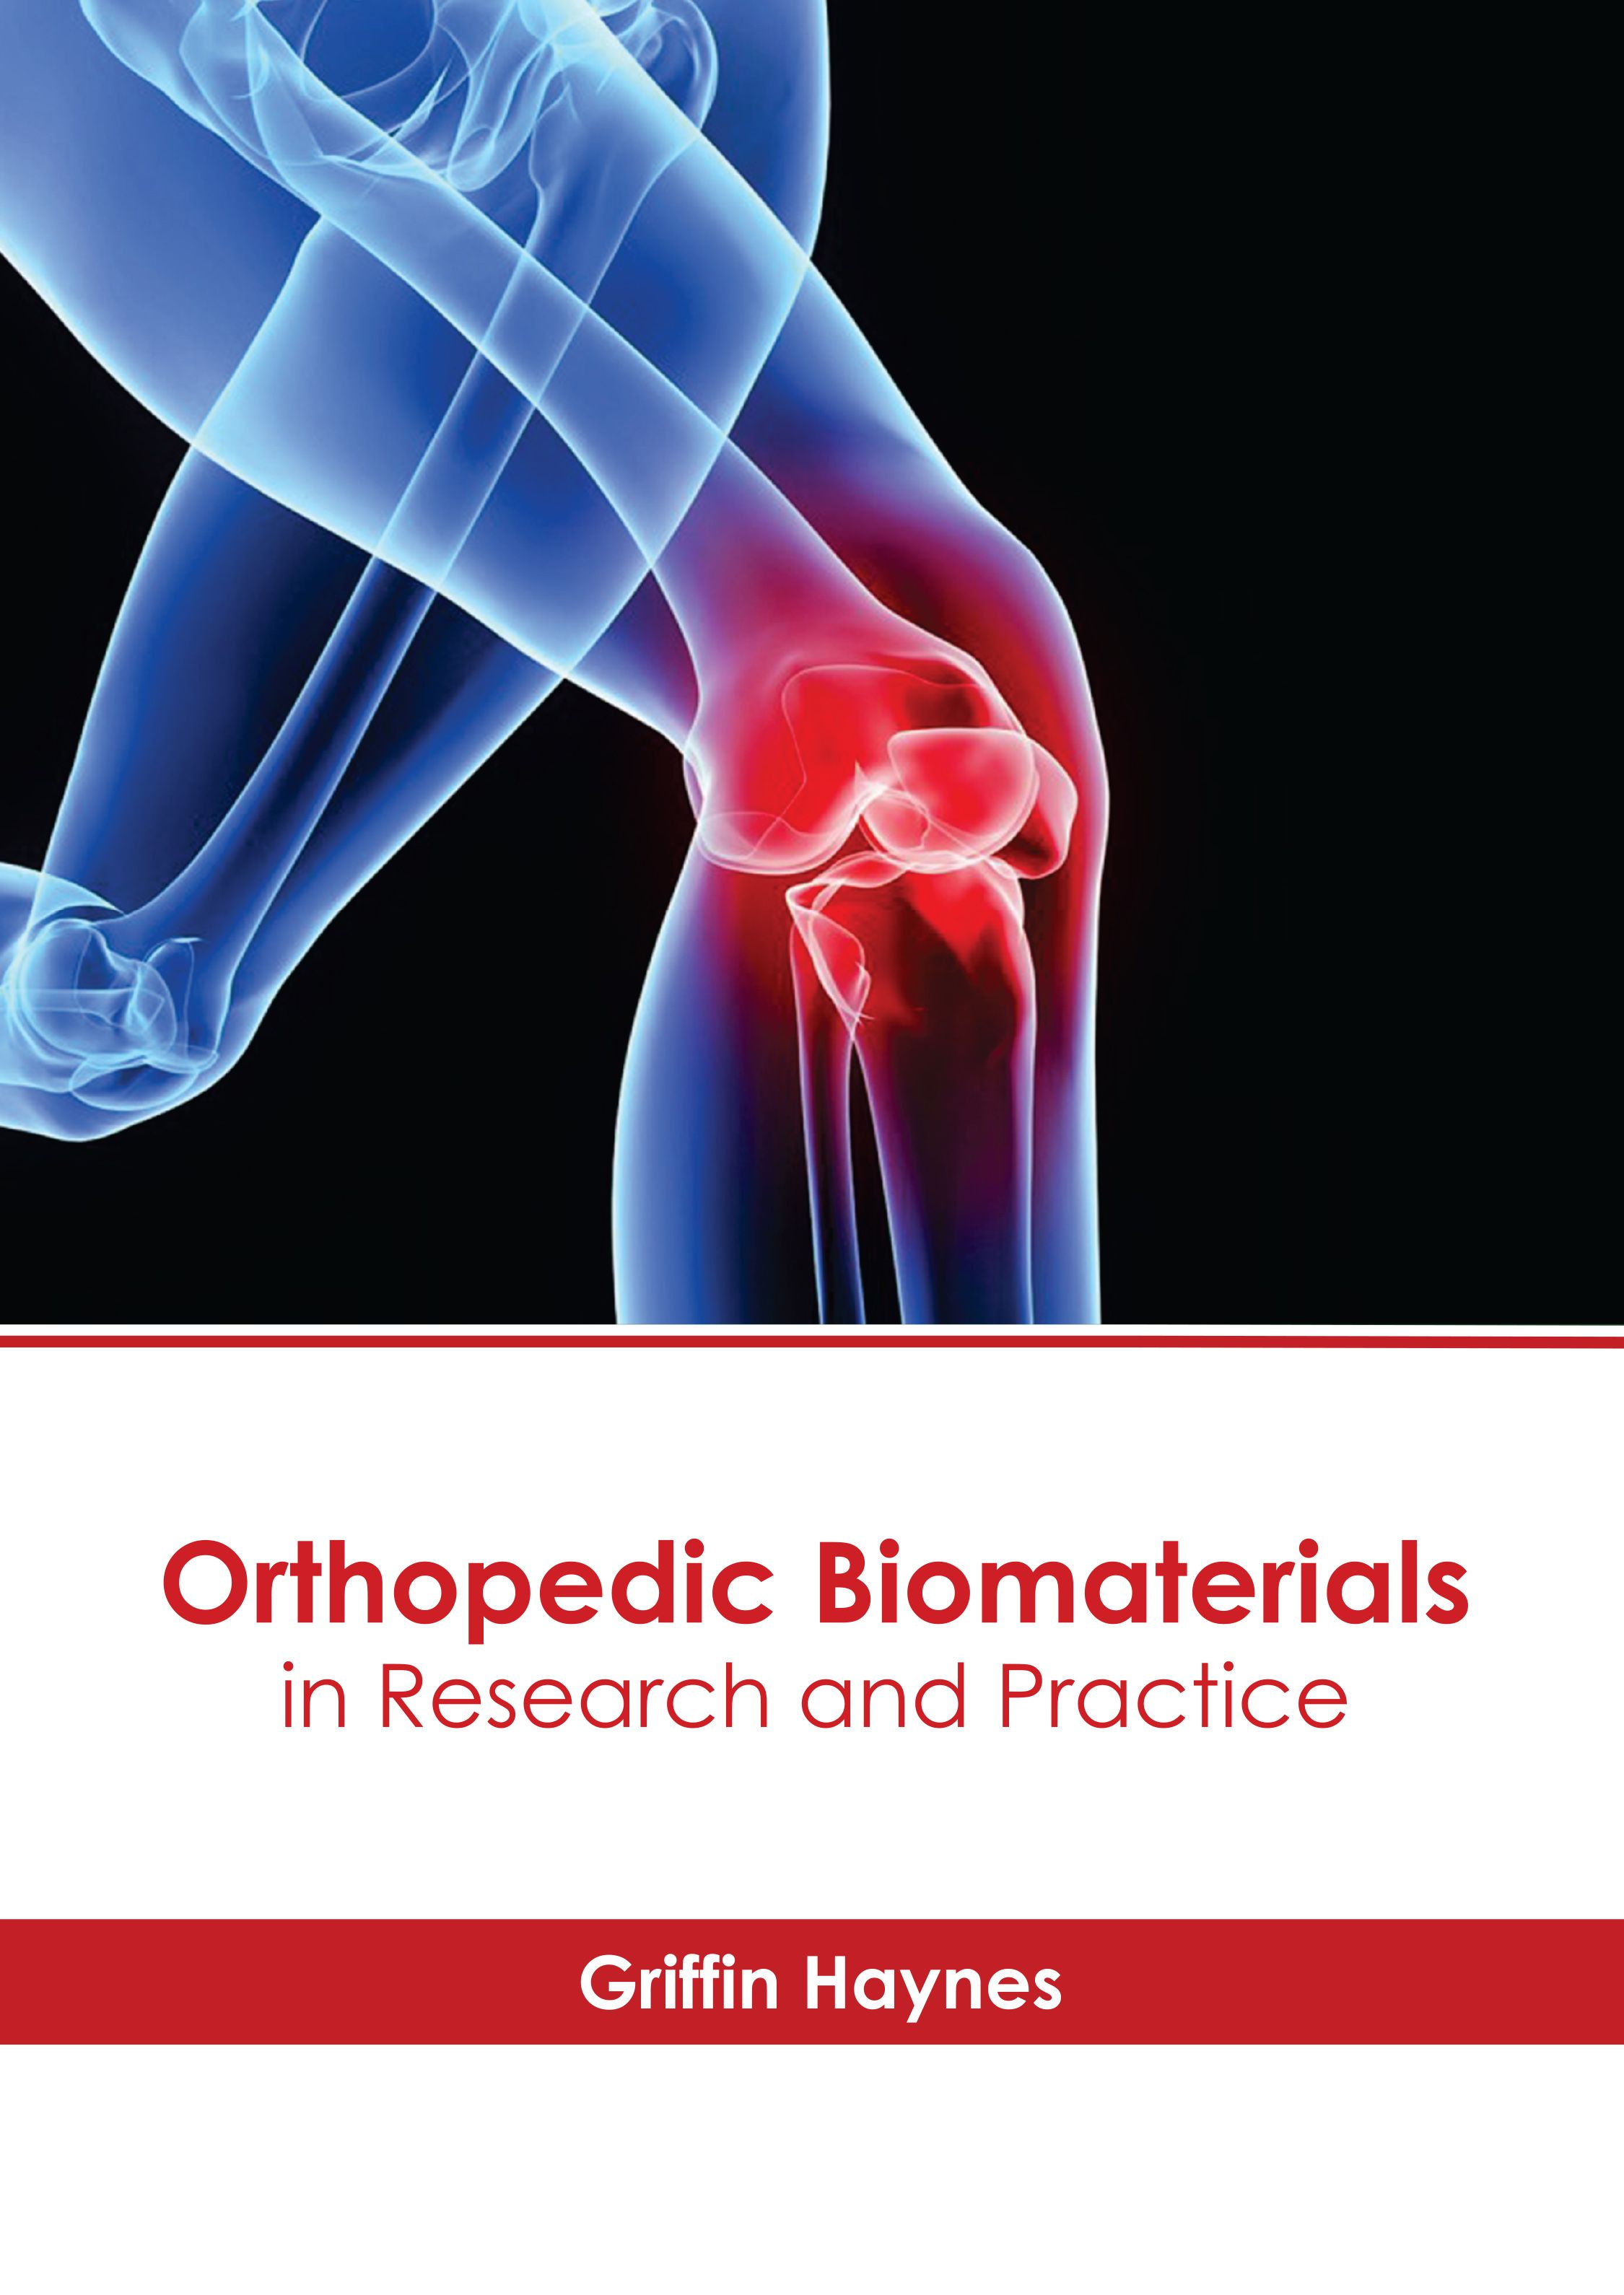 ORTHOPEDIC BIOMATERIALS IN RESEARCH AND PRACTICE